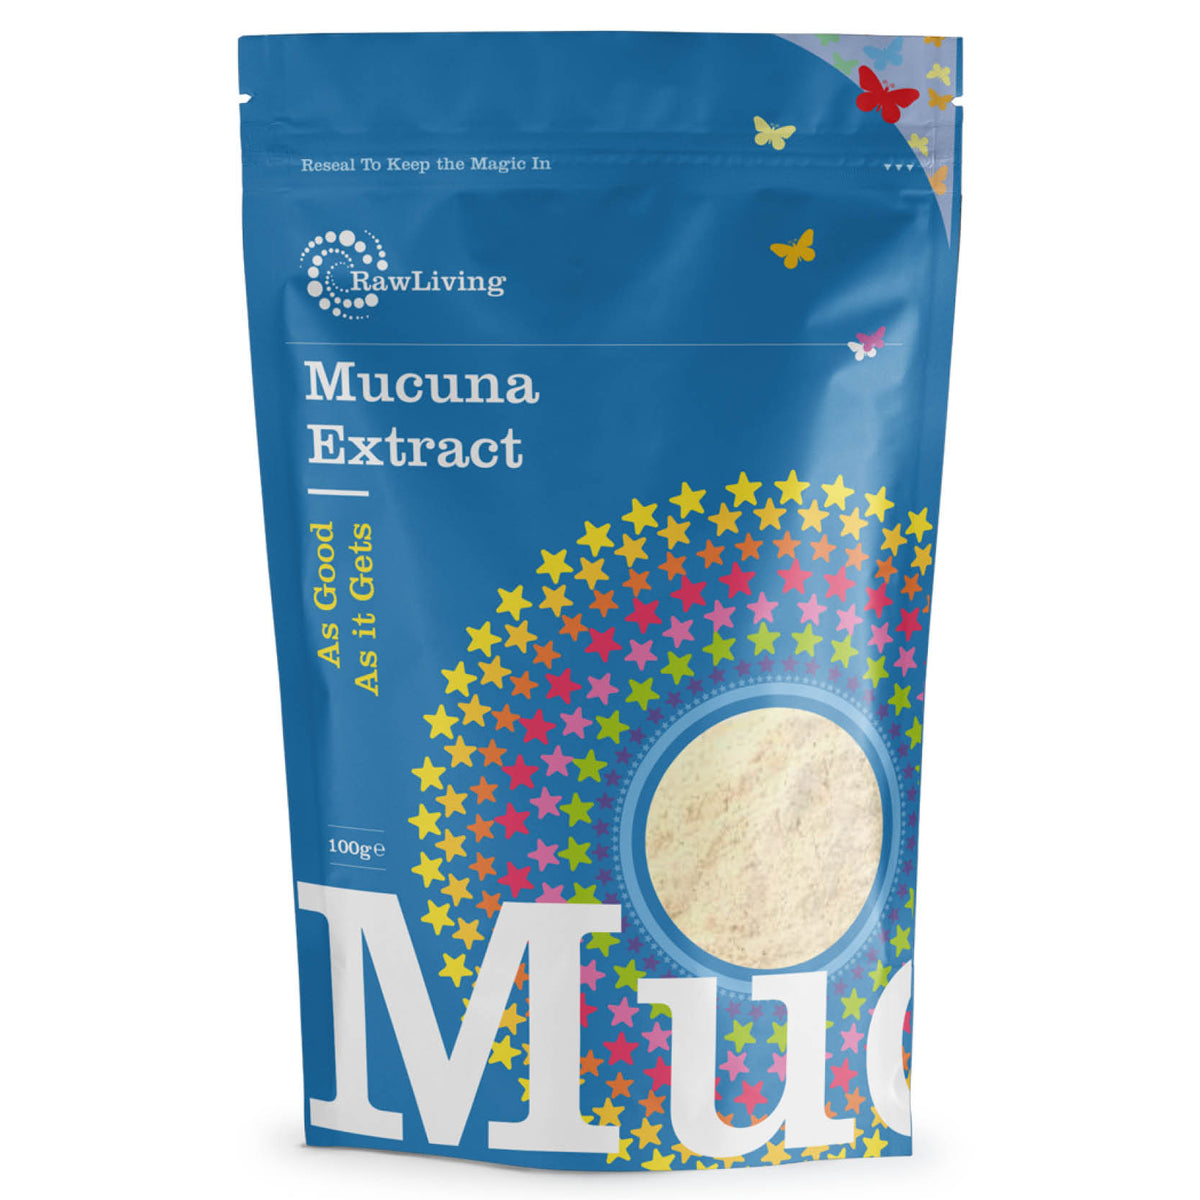 Mucuna Pruriens 5:1 Extract Powder | Raw Living UK | Tonic Herbs | Super Foods | Raw Living Mucuna Pruriens Extract Powder: Mucuna is used in Ayurveda and is a source of naturally occurring 5Htp, DMT &amp; boosts Dopamine in the brain.